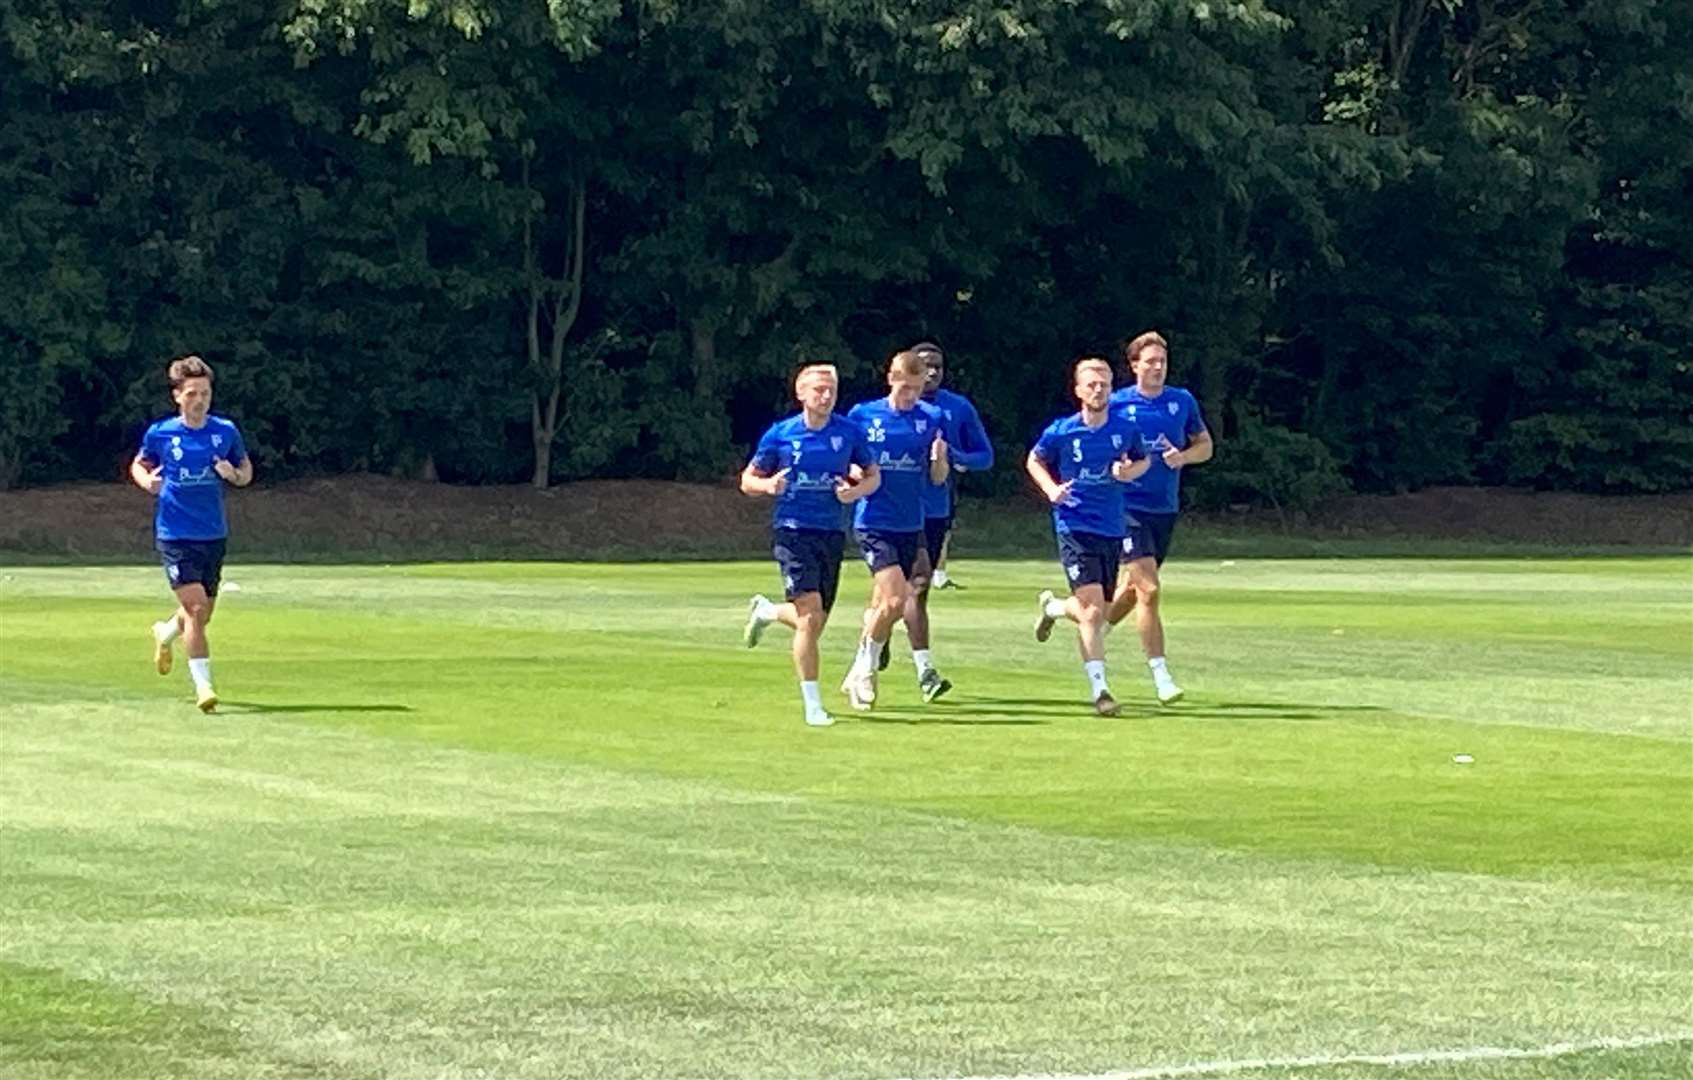 Gillingham players, including new signing Max Clark, in training this week at Beechings Cross